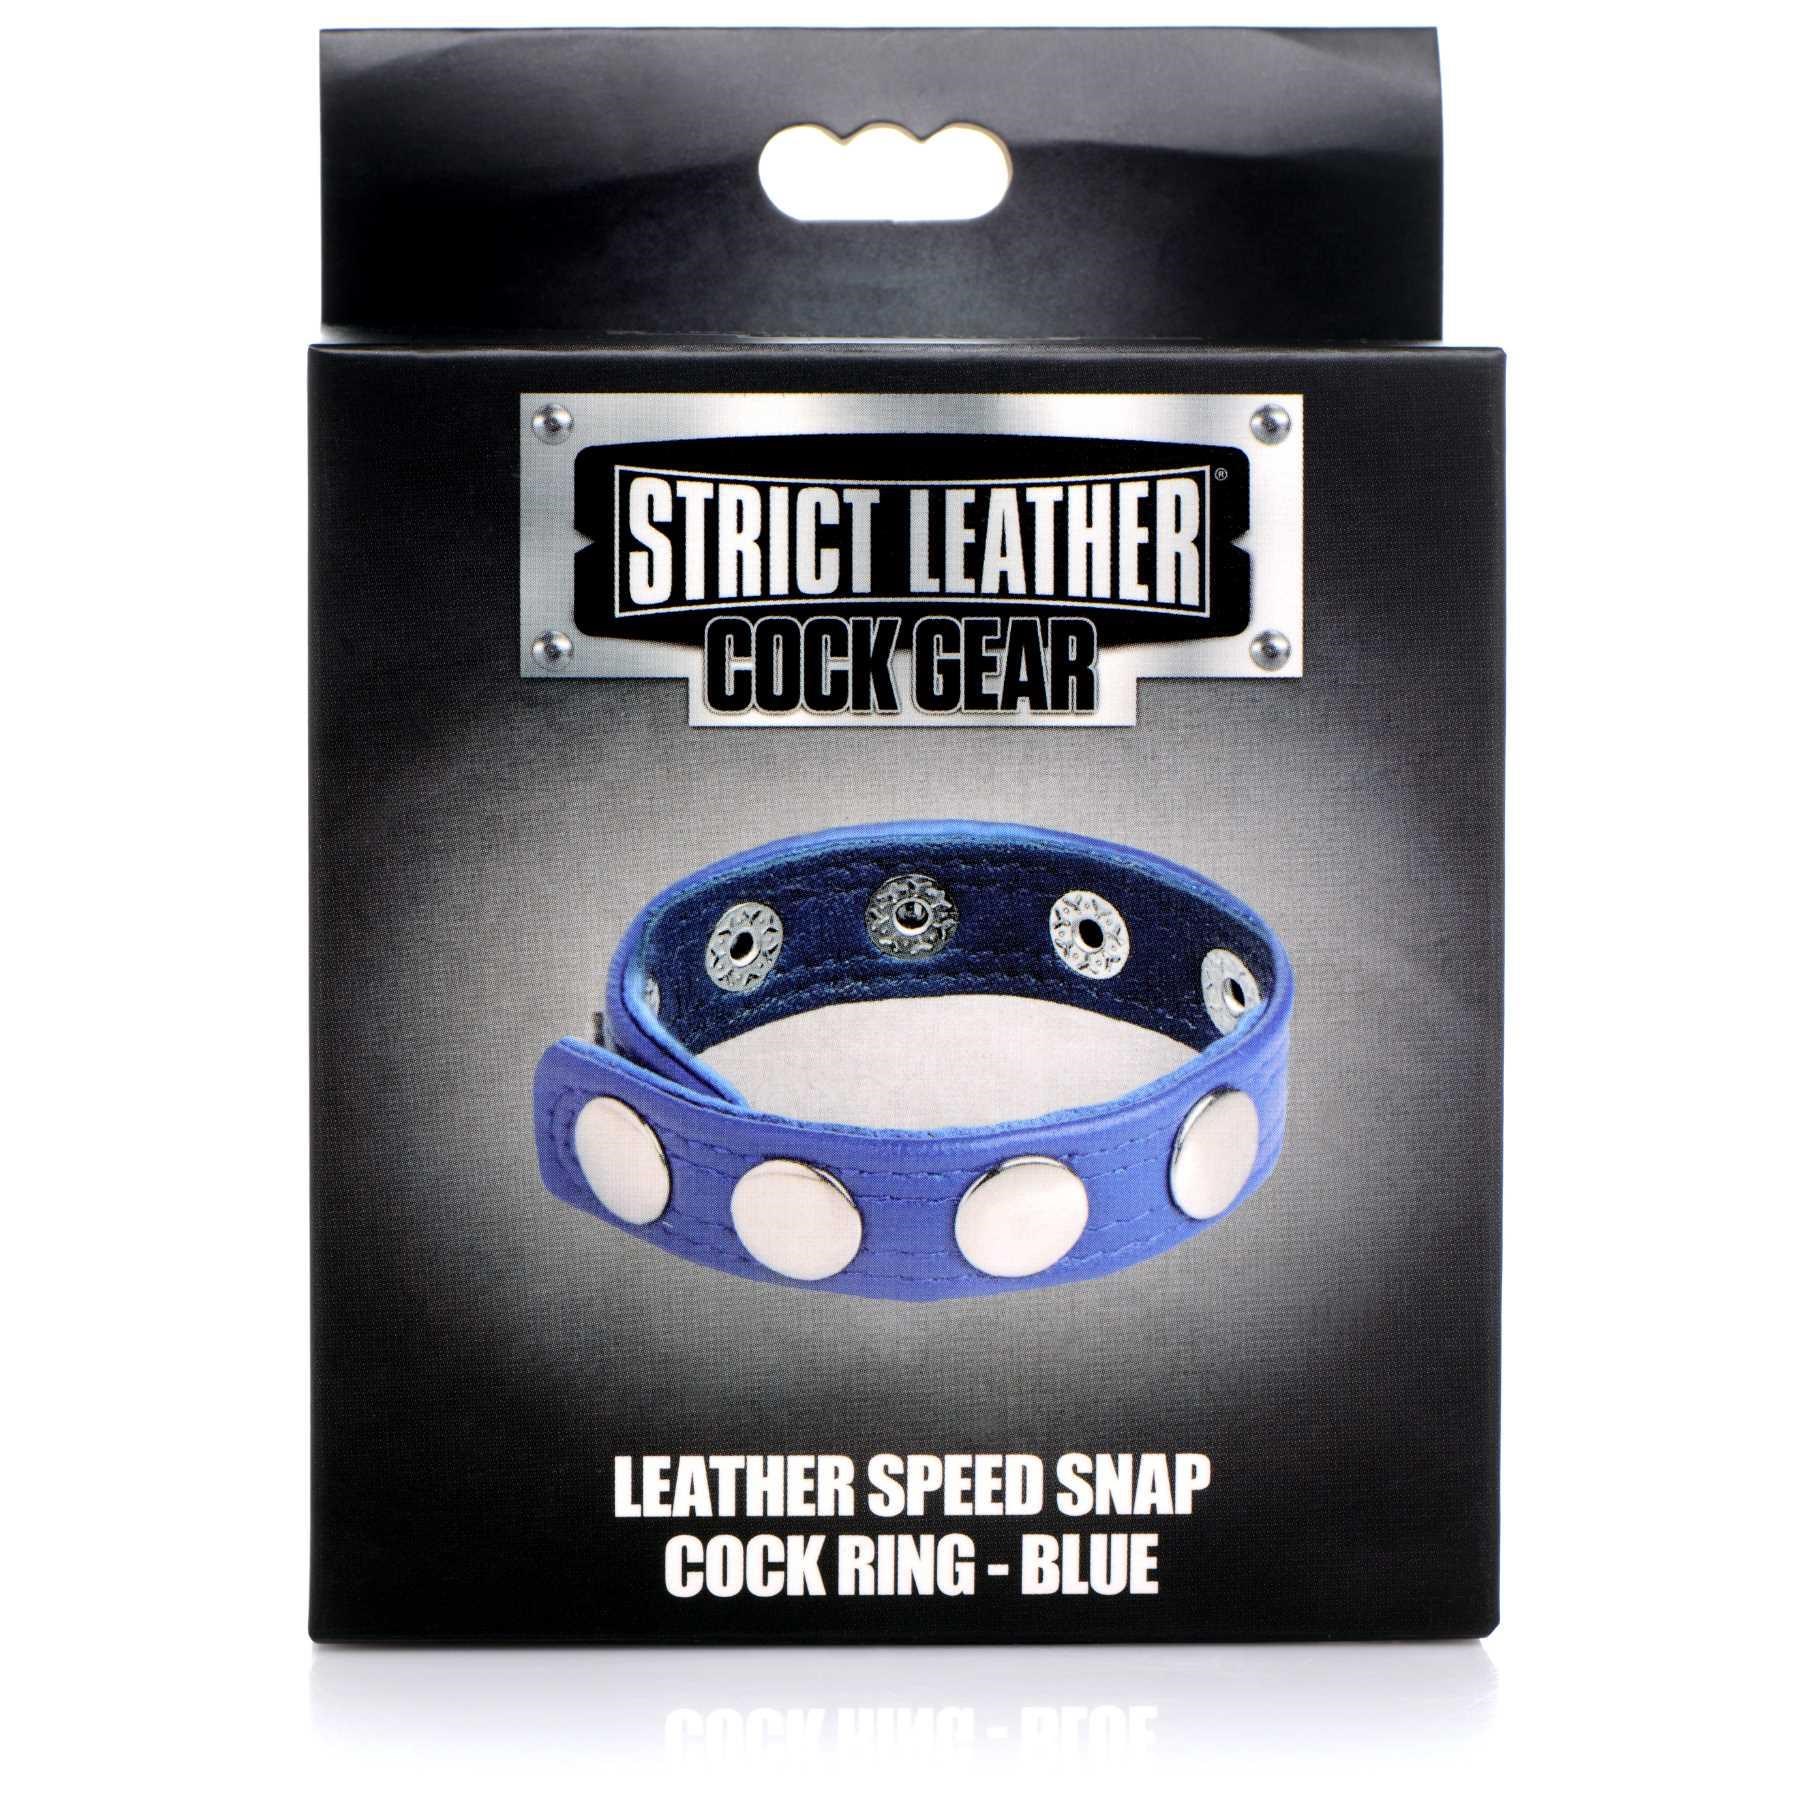 Cock Gear Leather Speed Snap Cock Ring packaging